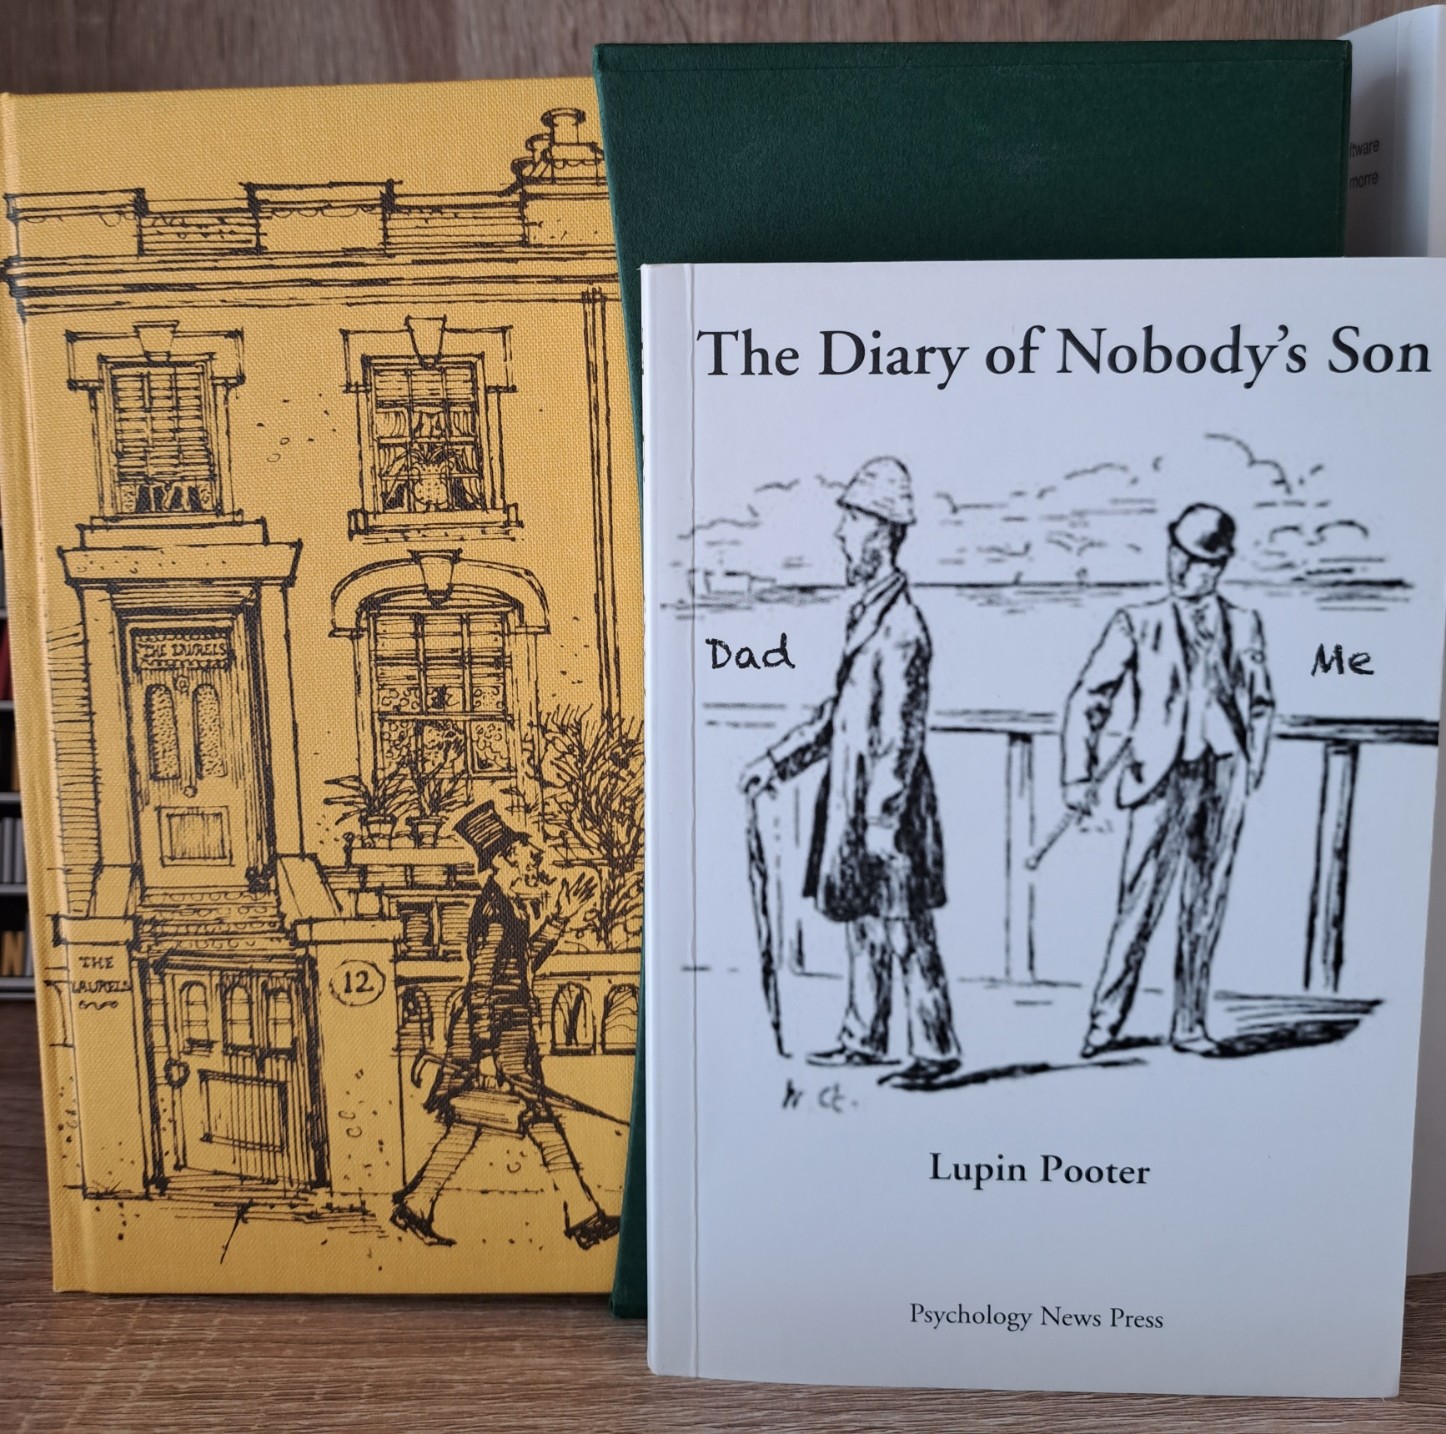 A picture of two books, "The Diary of a Nobody" and "The Diary of Nobody's Son".